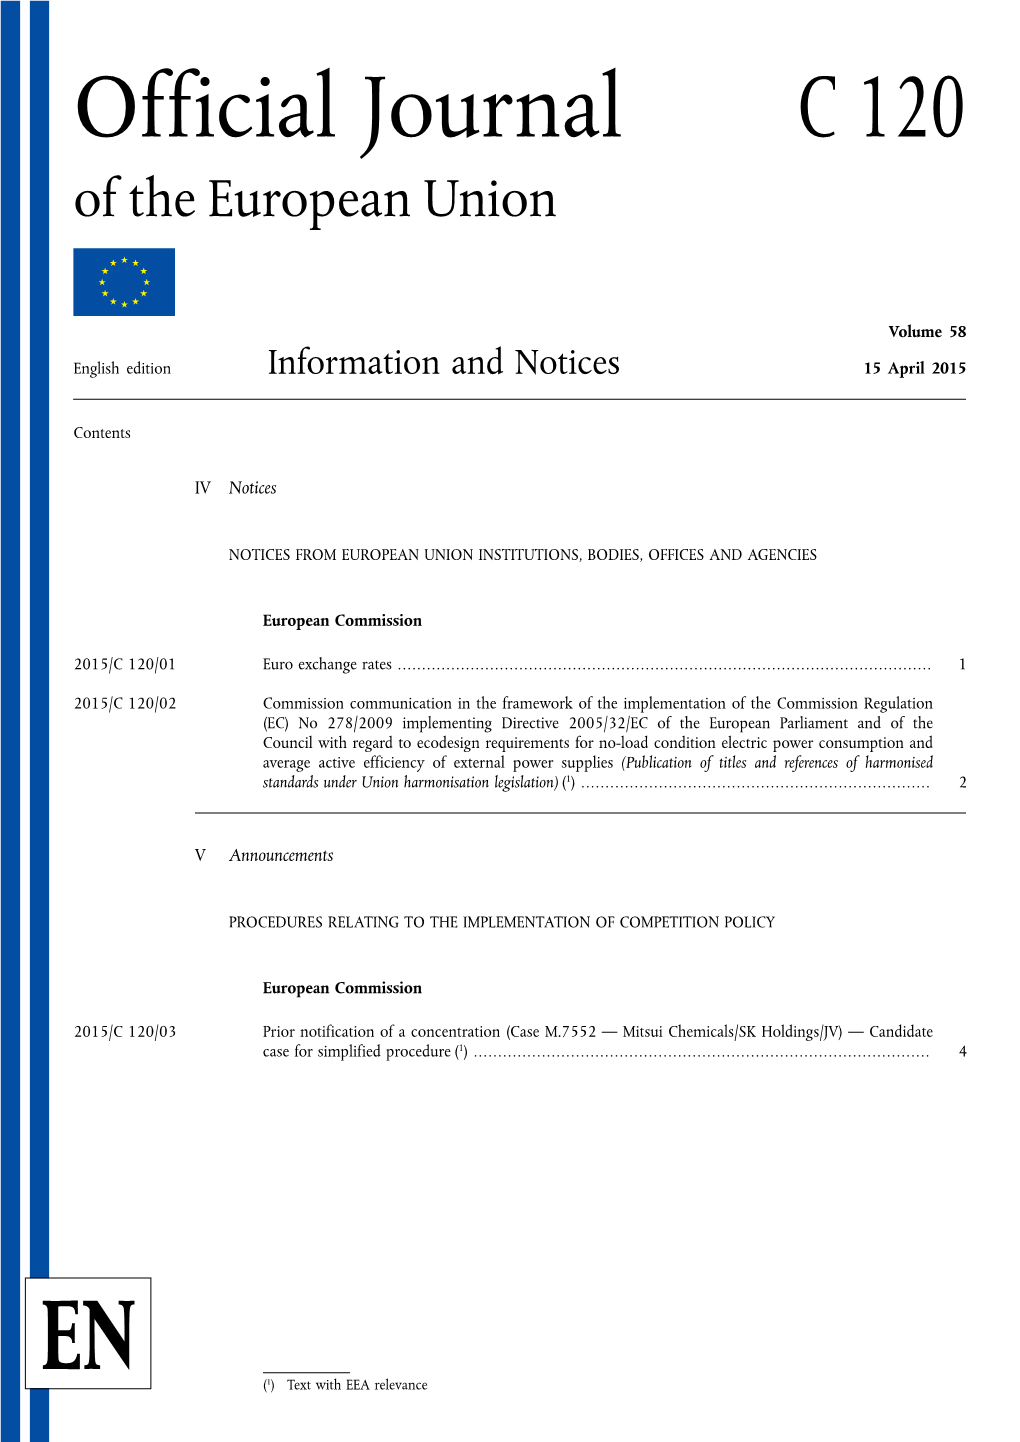 Official Journal C 120 of the European Union